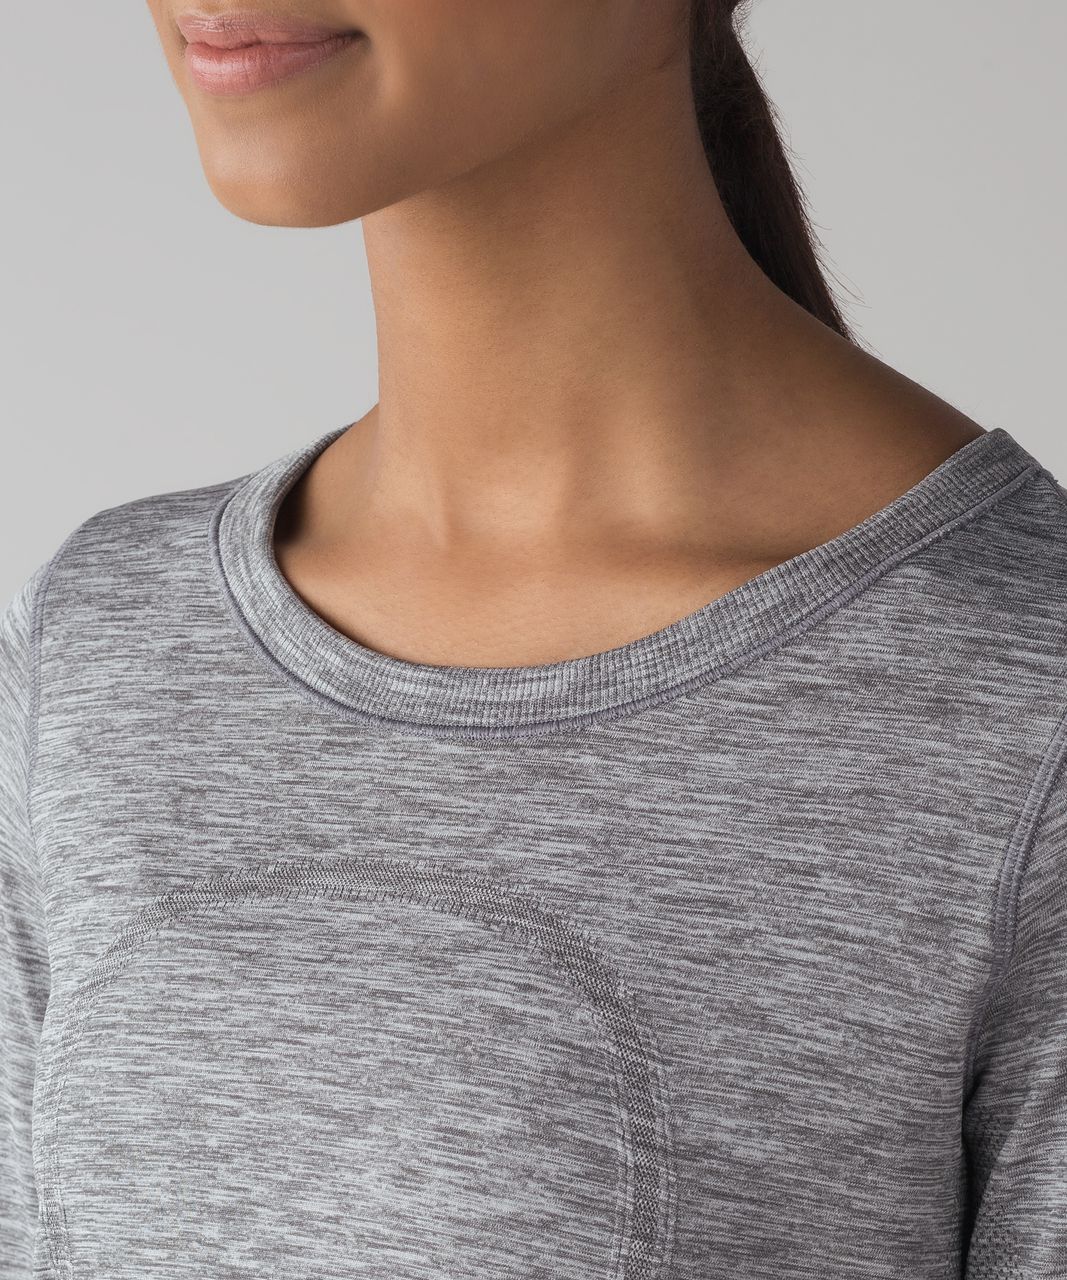 Lululemon Swiftly Tech Long Sleeve (Breeze) *Relaxed Fit - Slate / White (First Release)